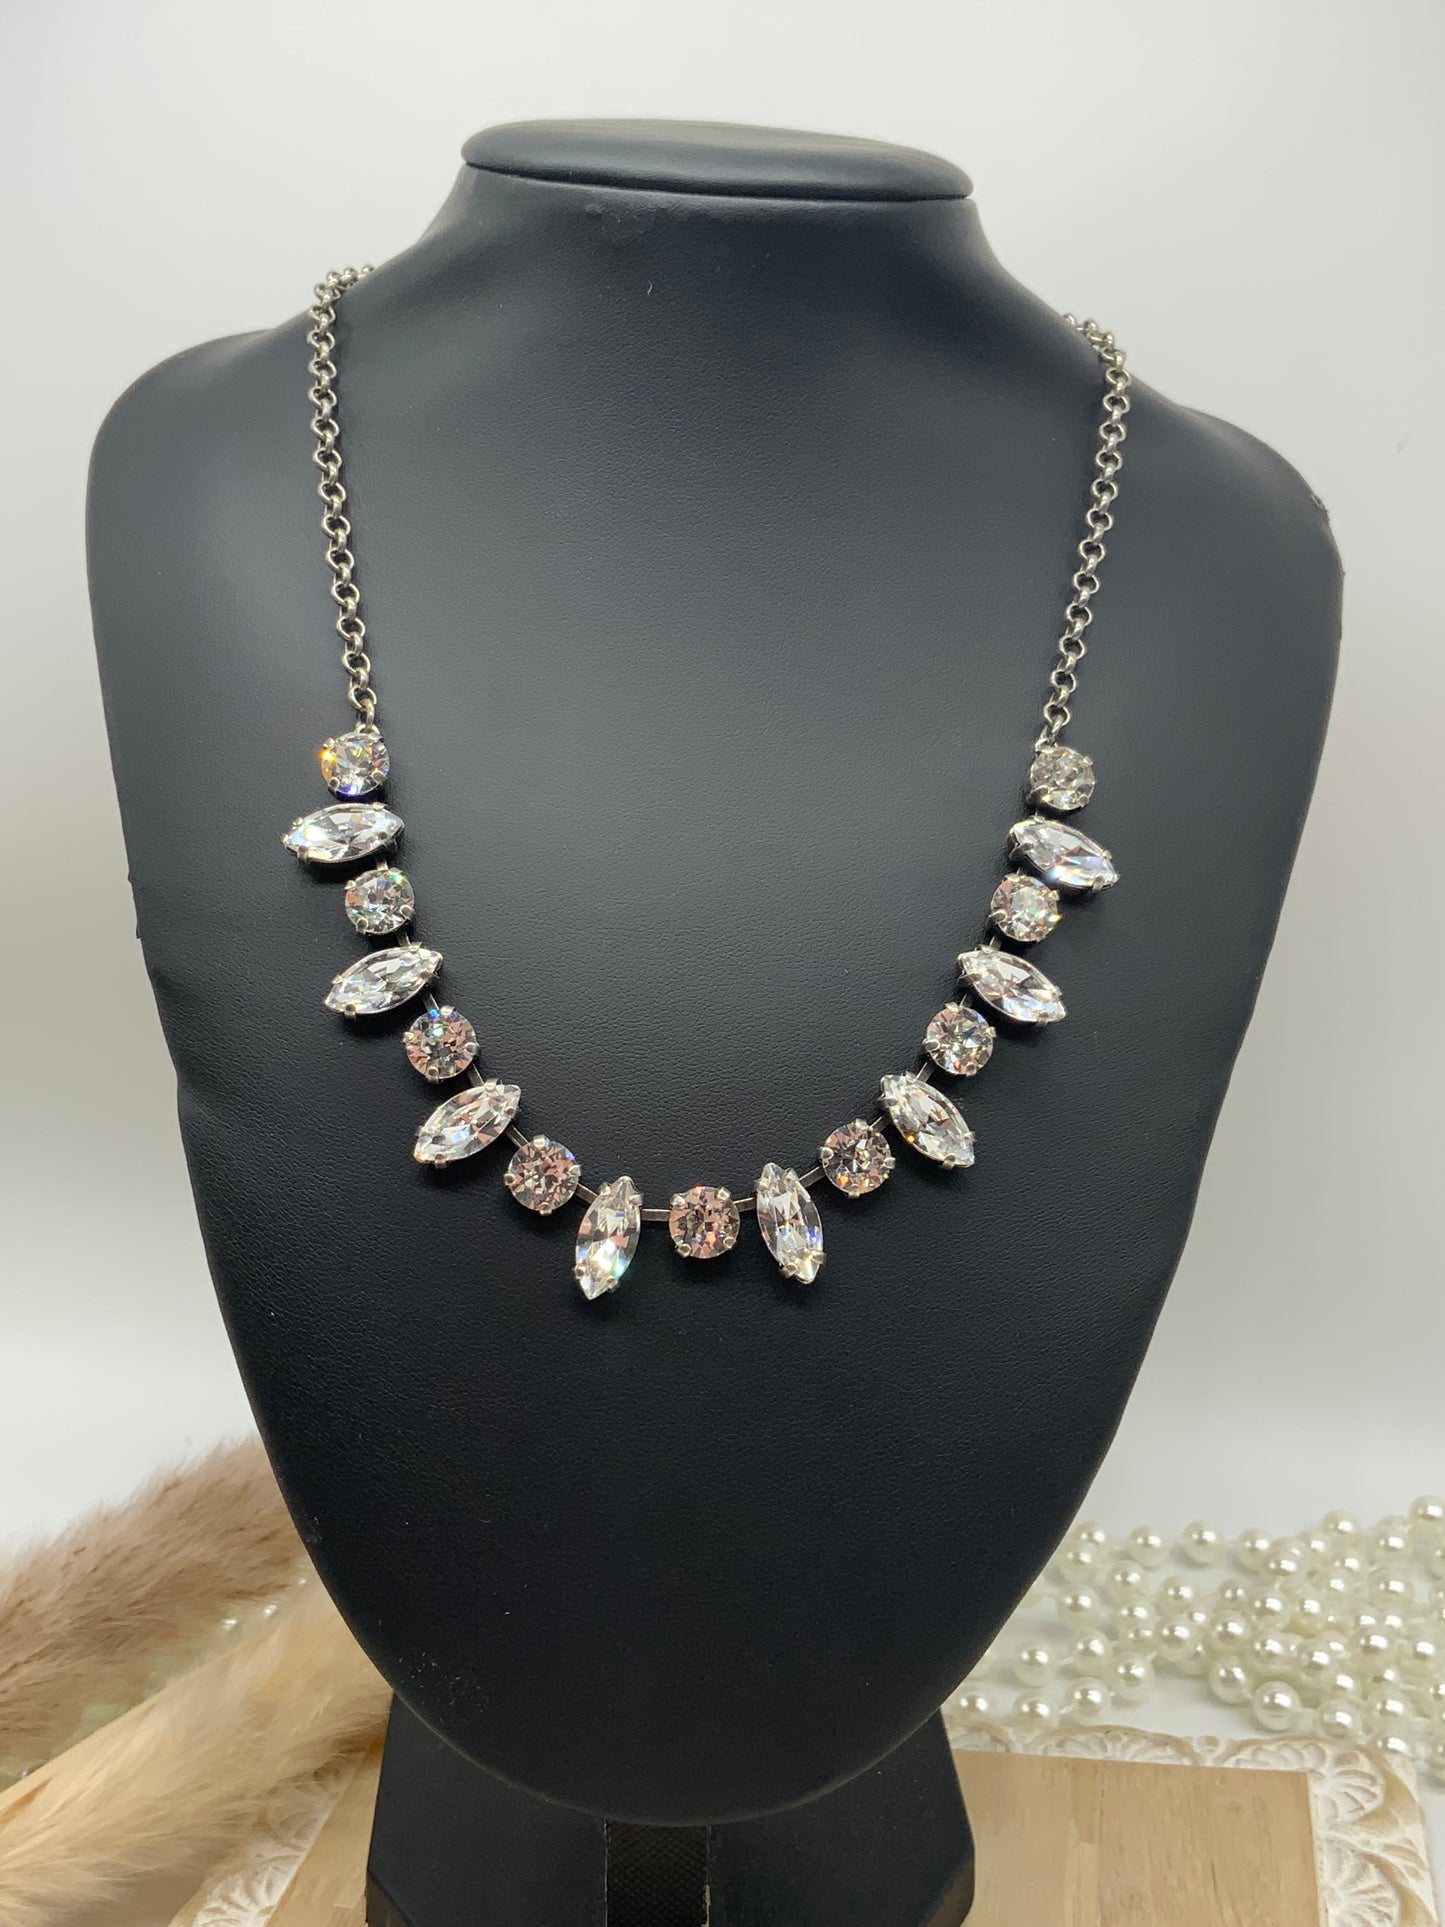 Simply Stunning Necklace